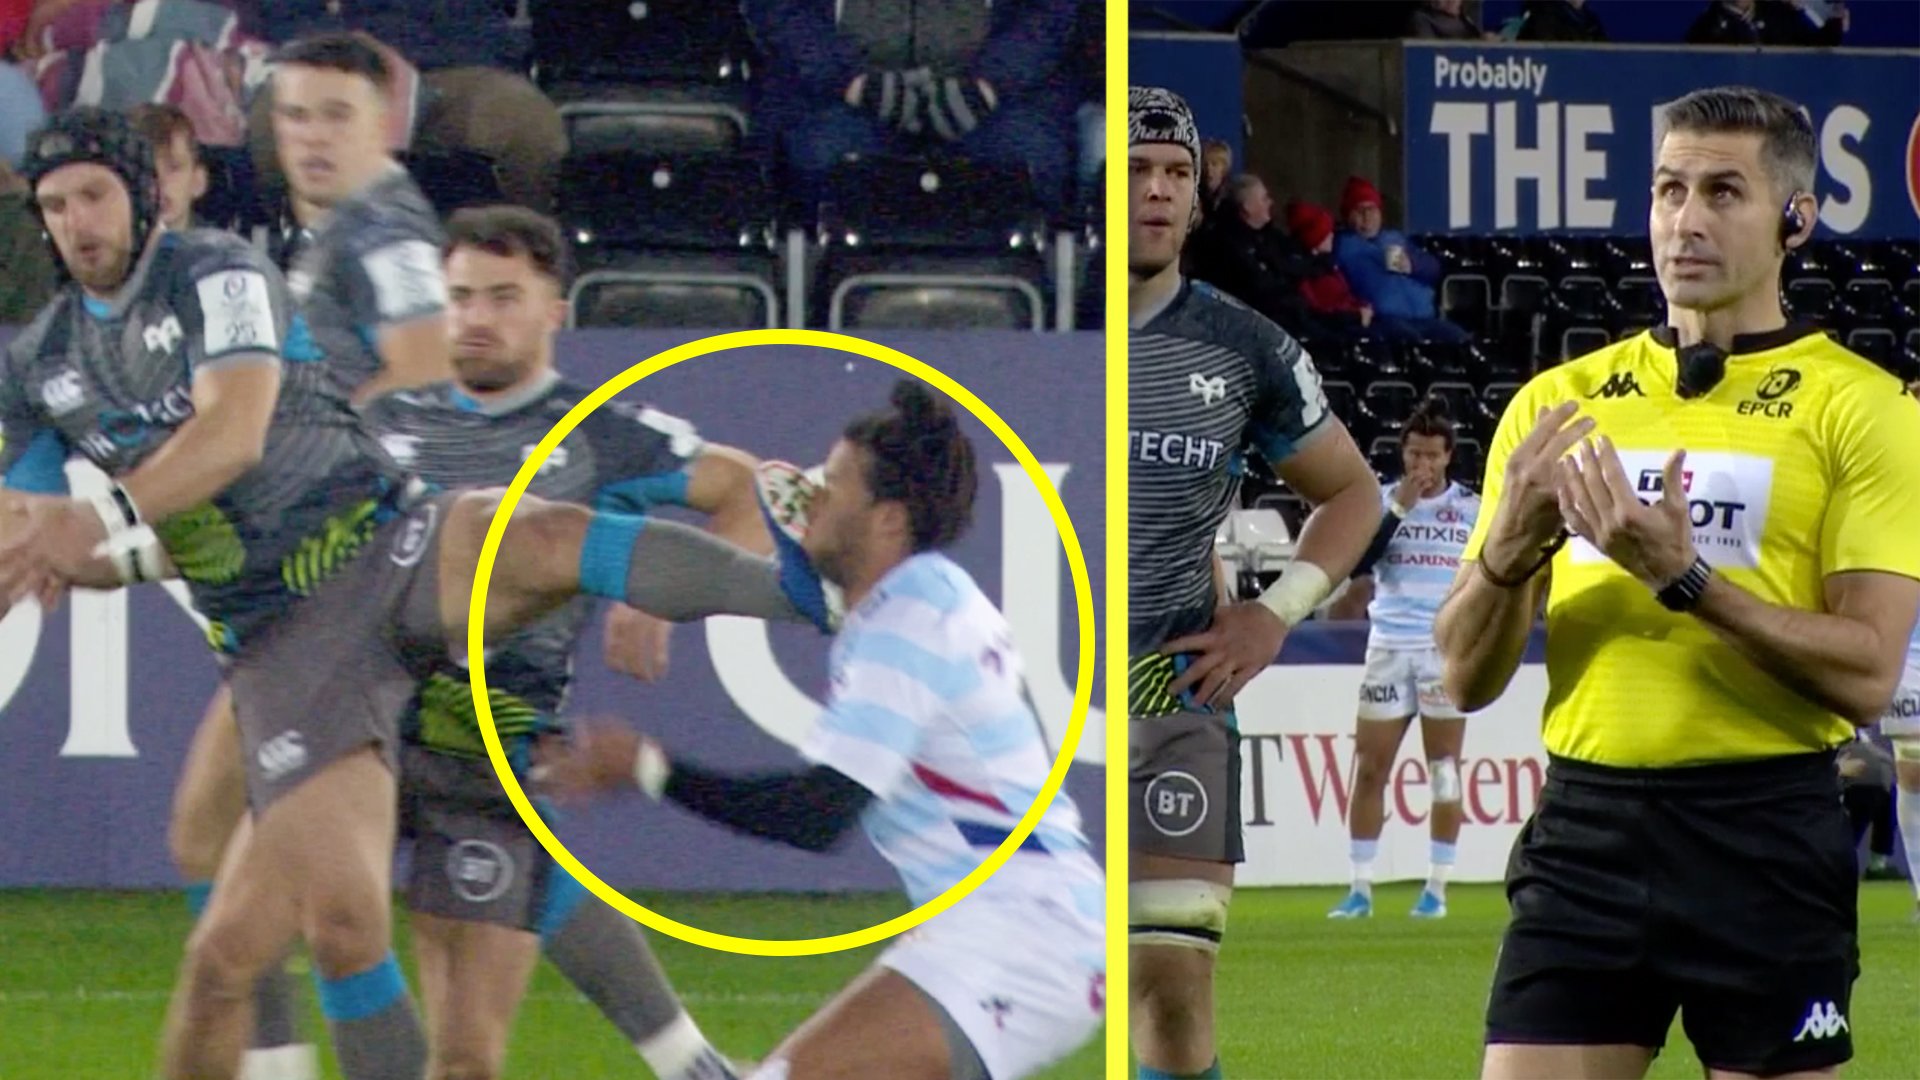 This is how you get yourself sent off a rugby field within 37 seconds a match starting